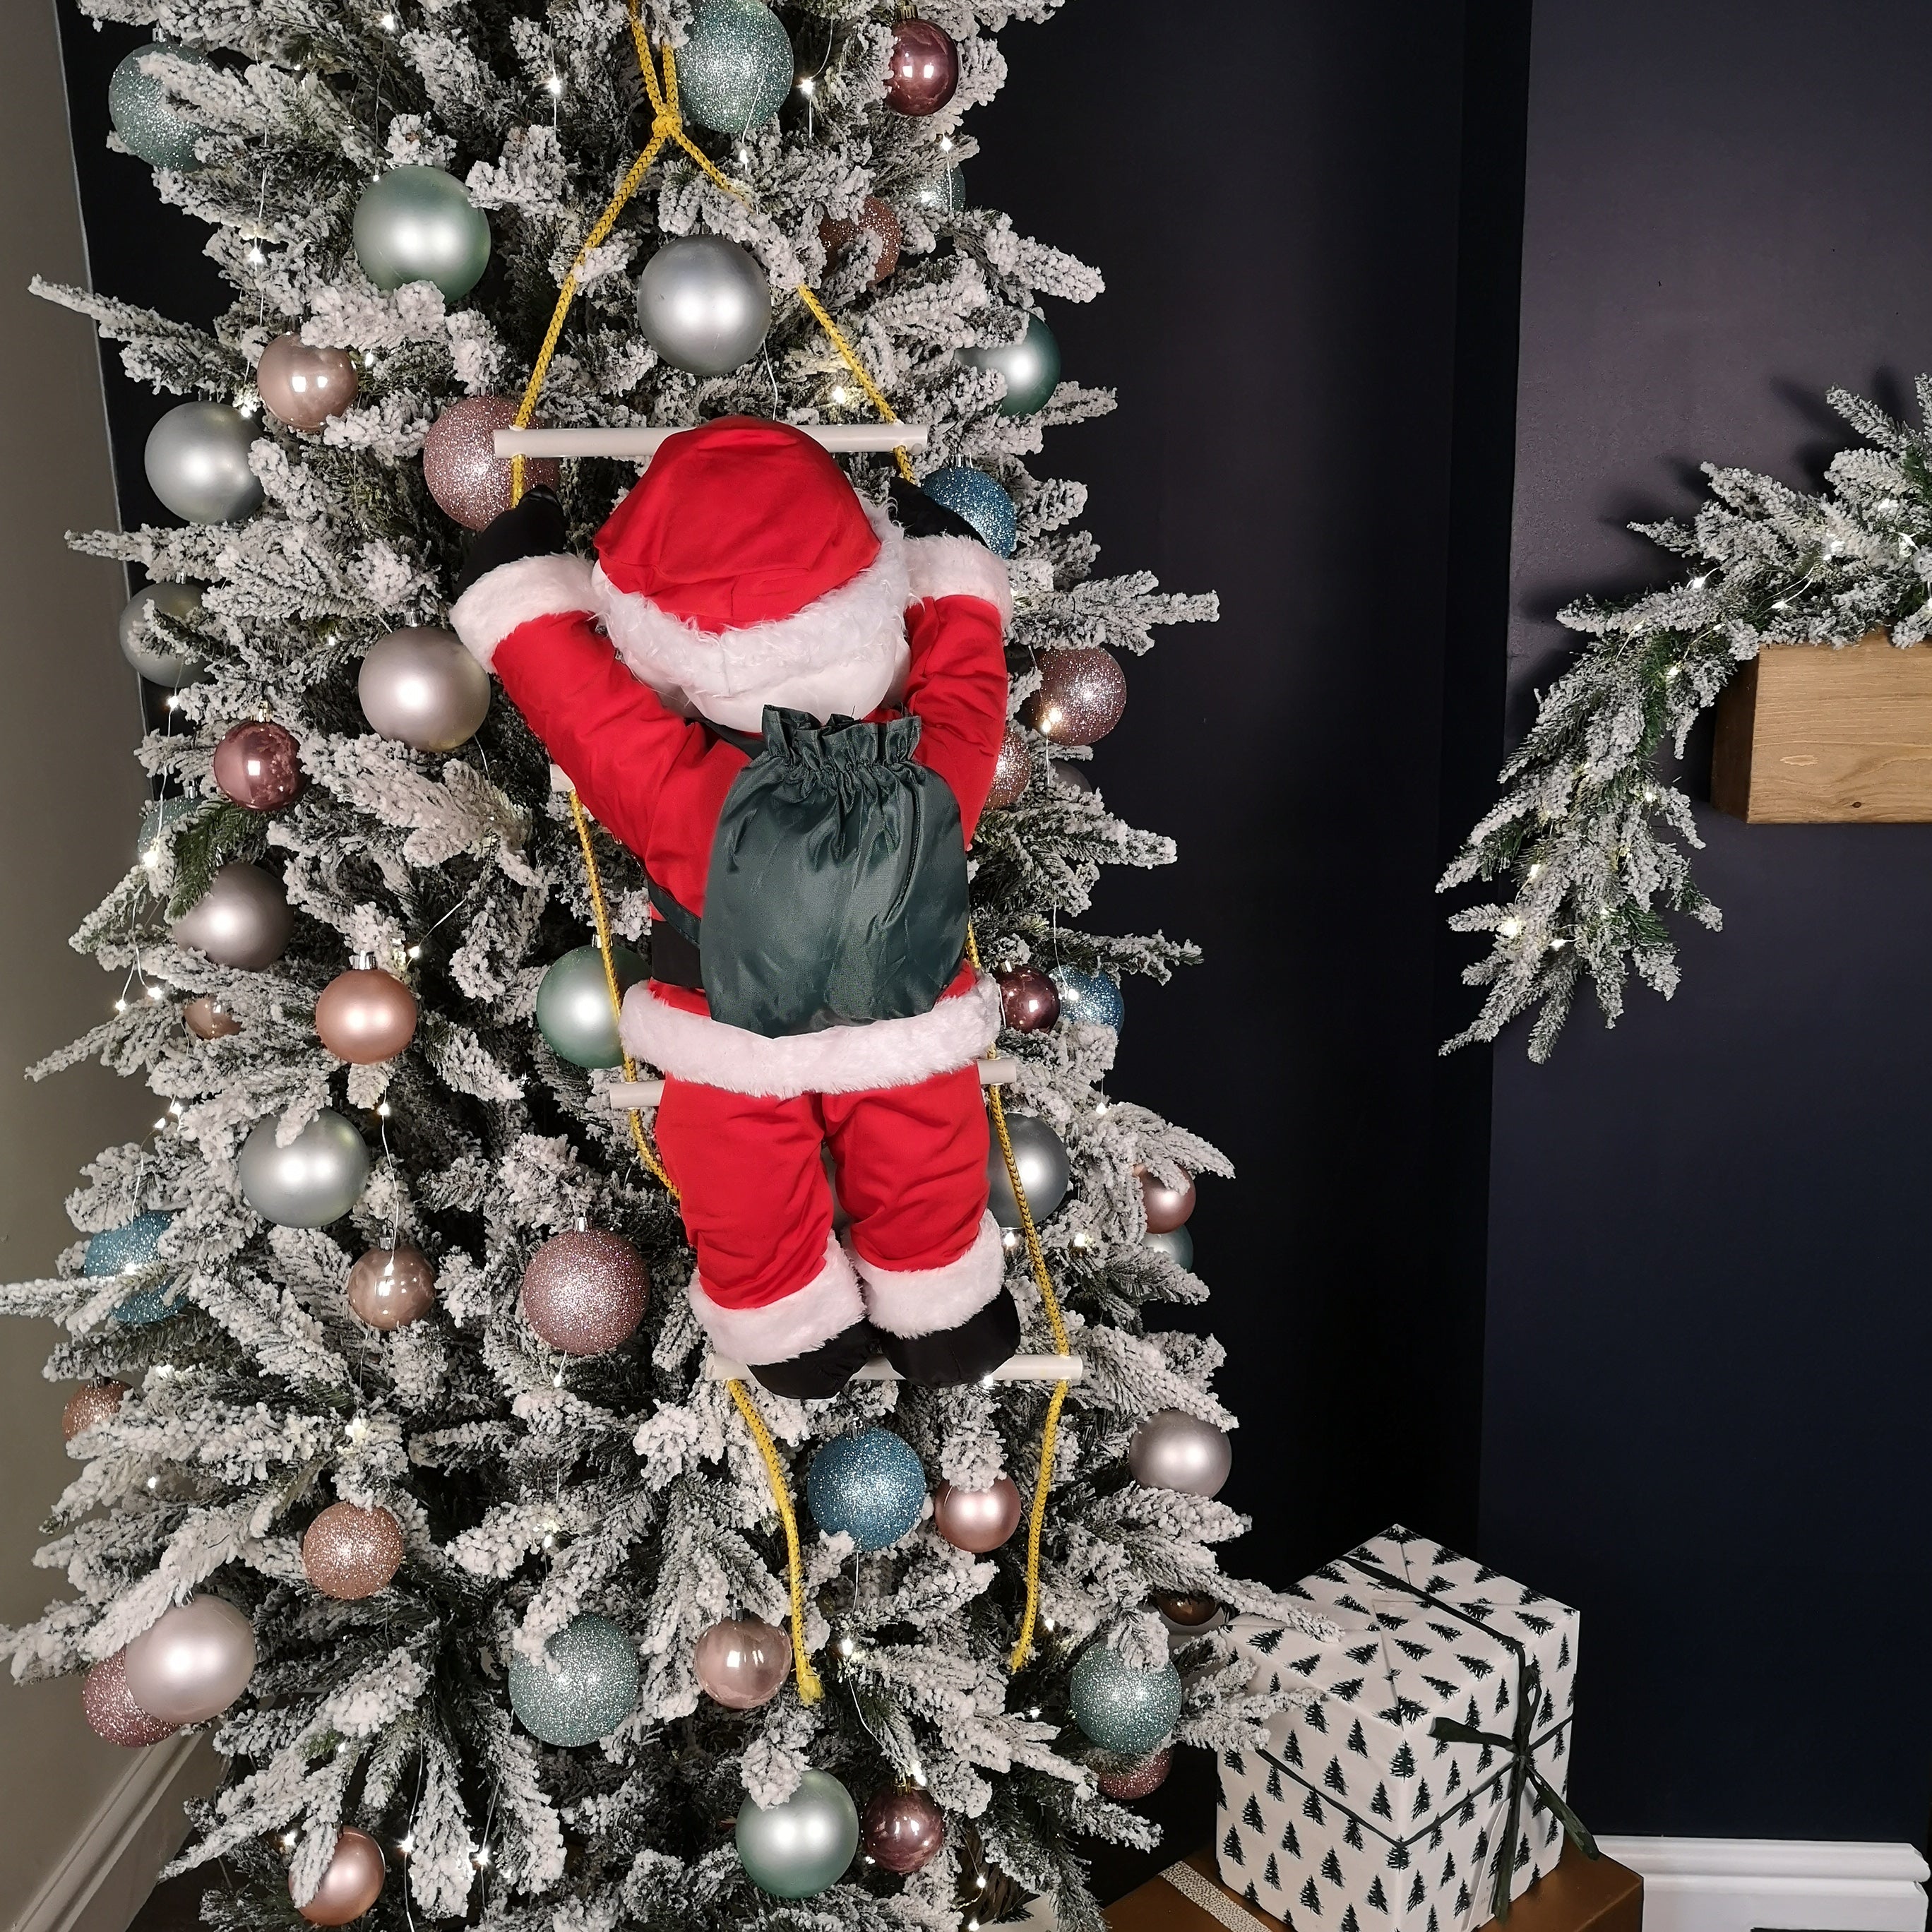 60cm Hanging Santa with Backpack Climbing Ladder Christmas Decoration